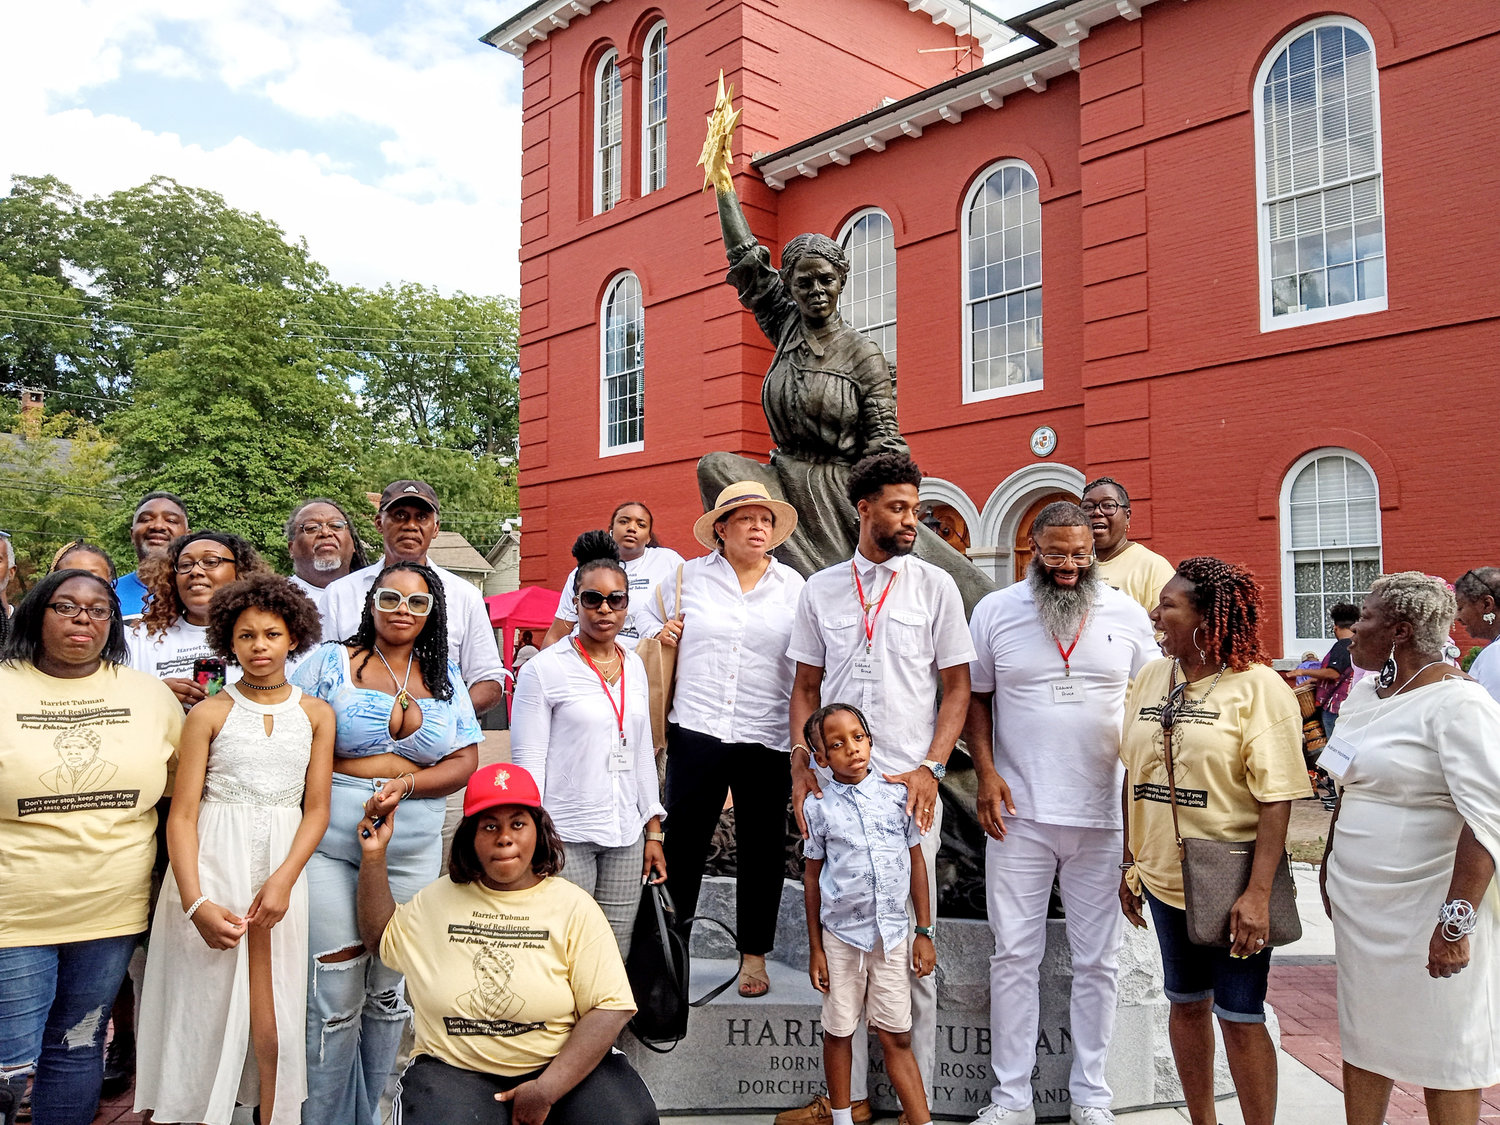 Tubman family descendents gathered to honor their ancestor at the courthouse. Otelia Burrell, front row, second from left, posed as Araminta Ross for Wesley Wofford's statue, joined by Adrian Holmes, far right.